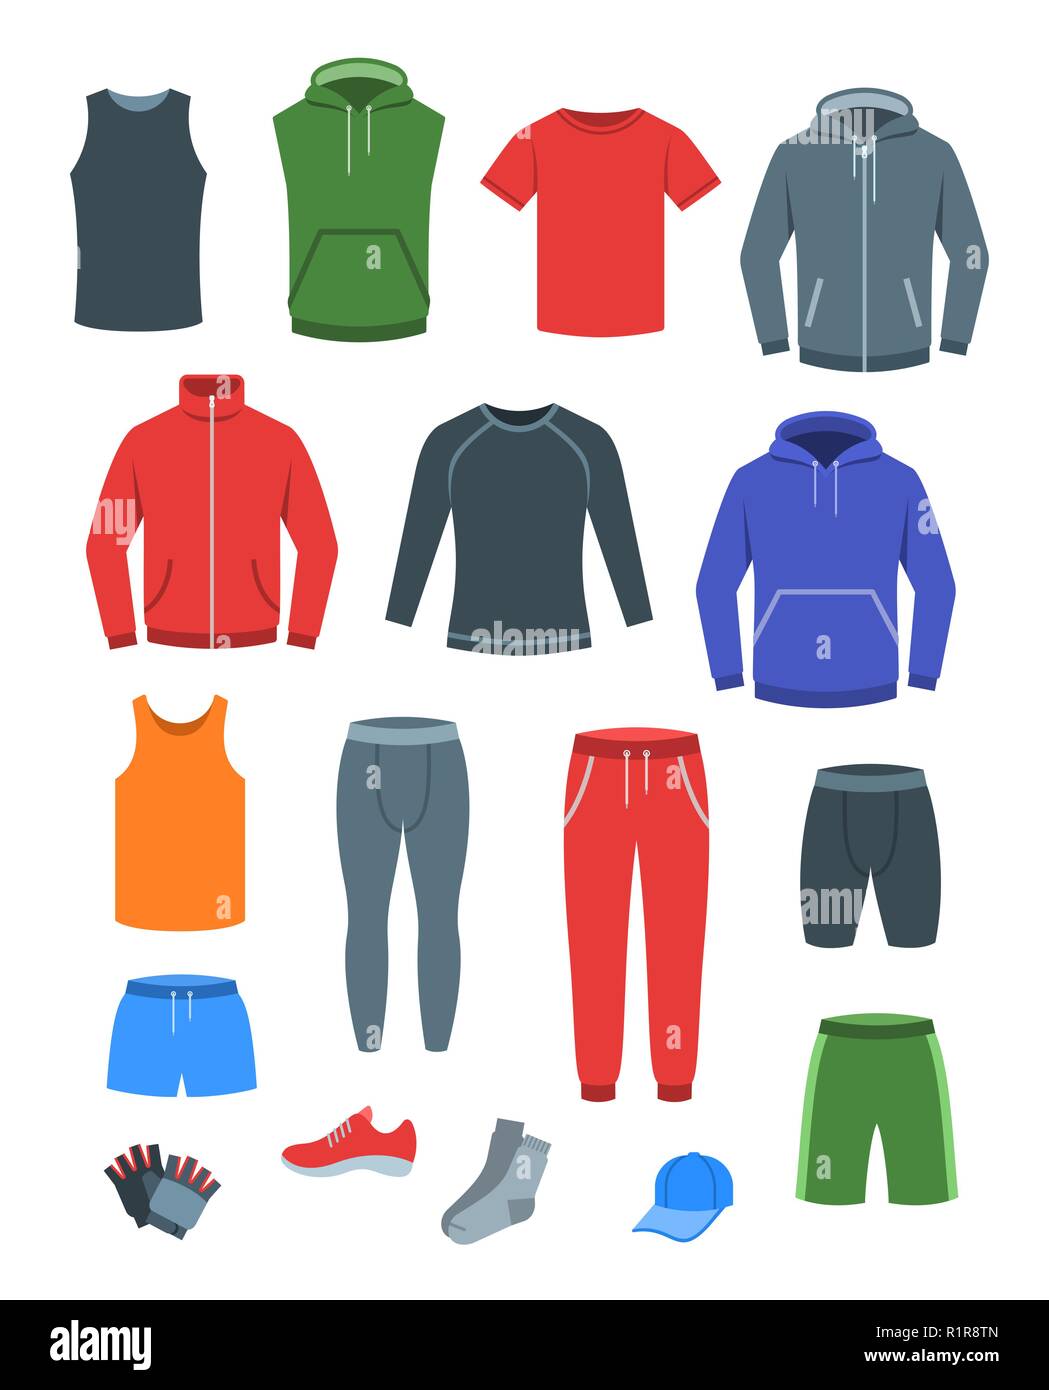 Men casual clothes for fitness training. Basic garments for gym